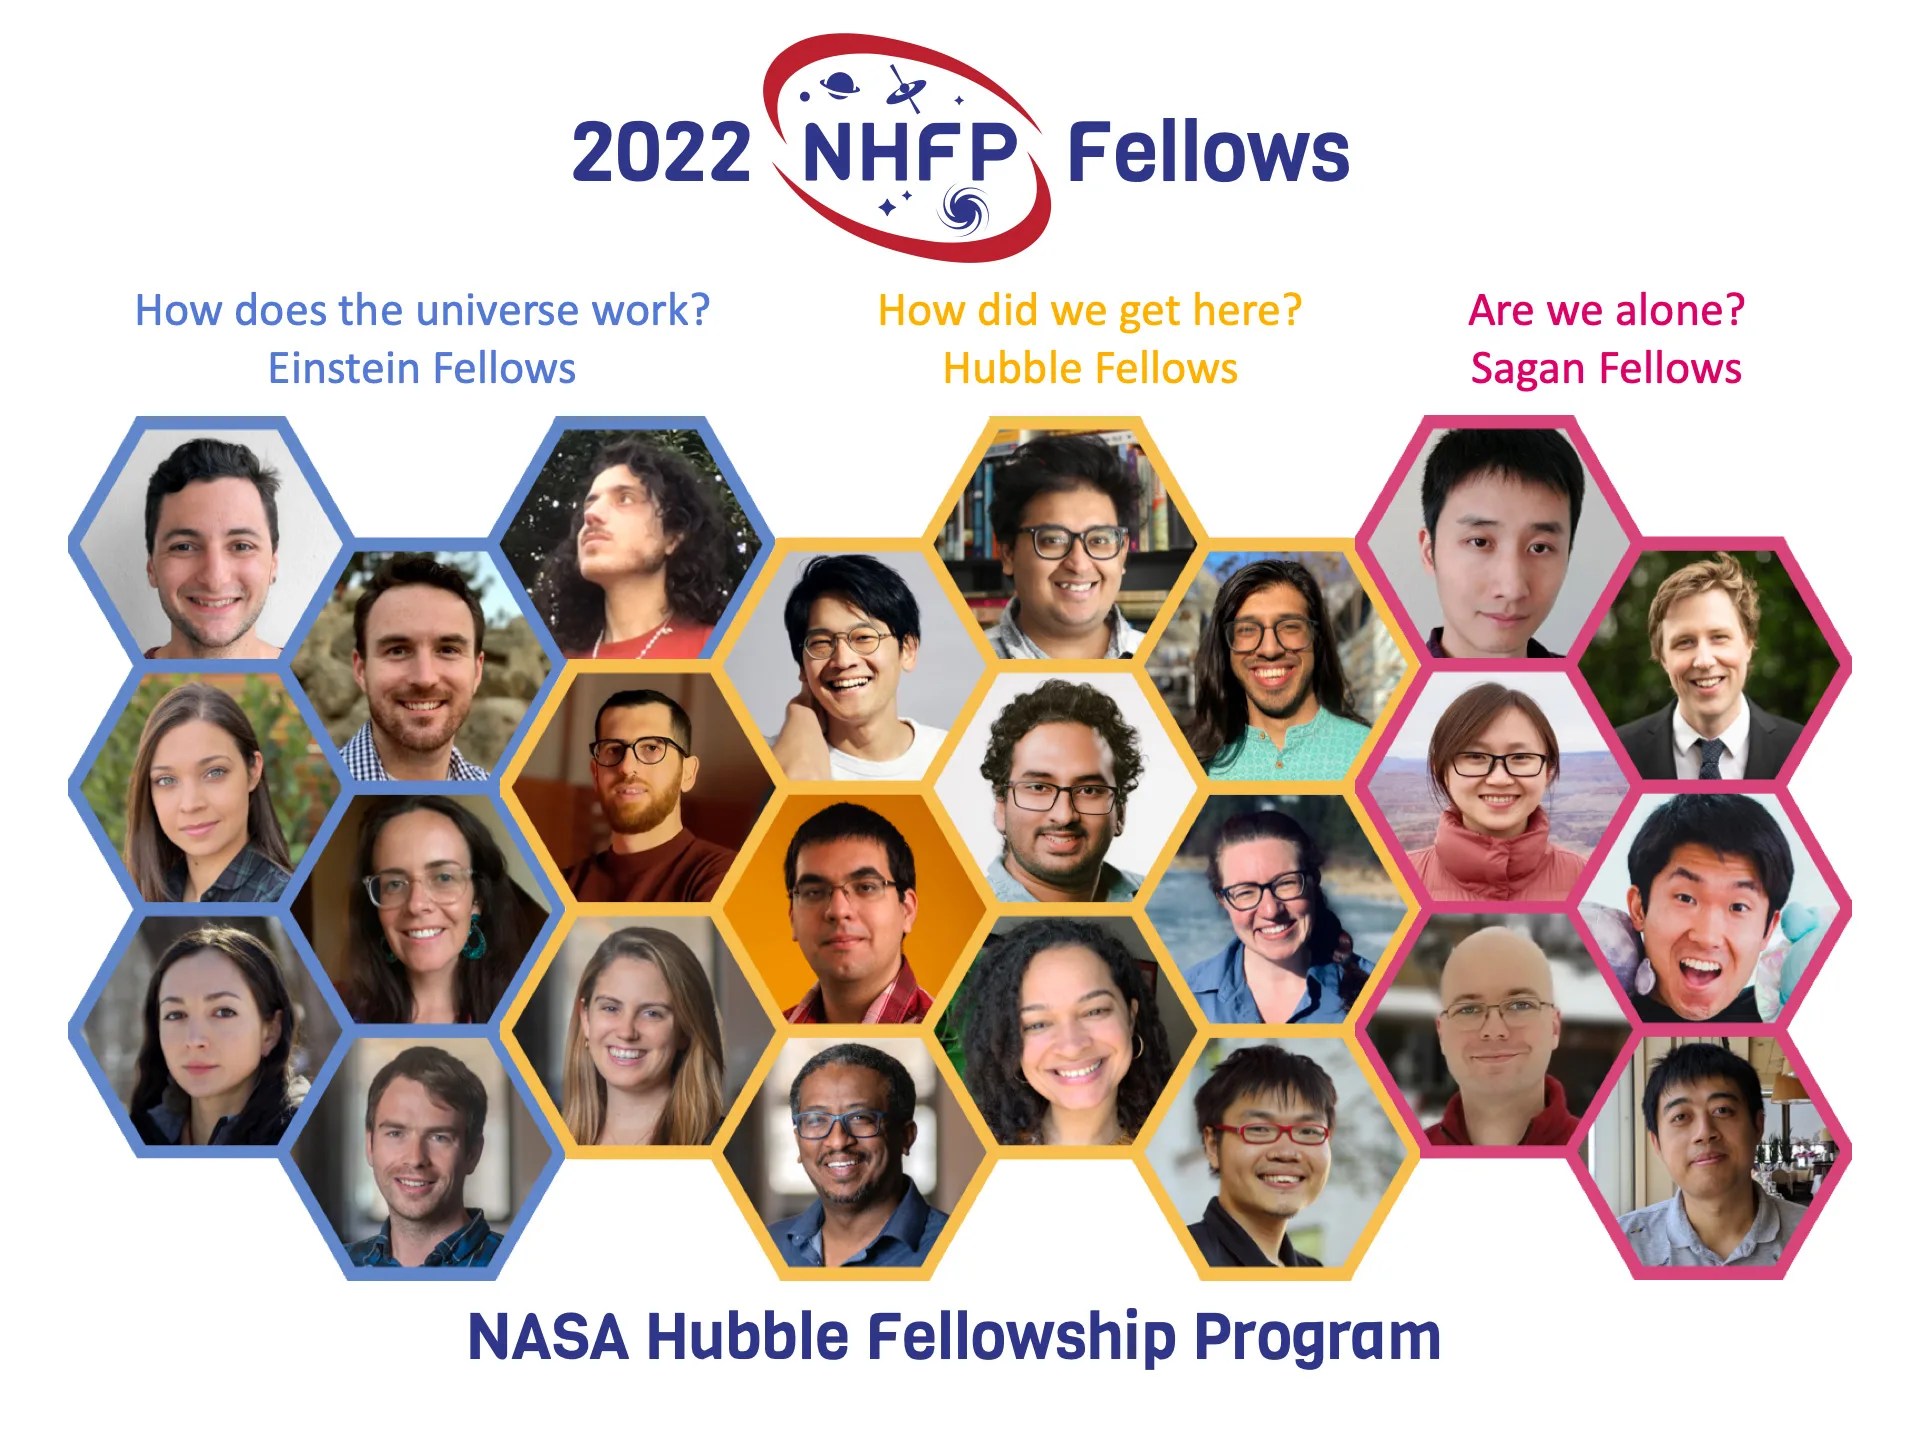 A montage of images of the 2022 NASA Hubble Fellowship Program recipients.